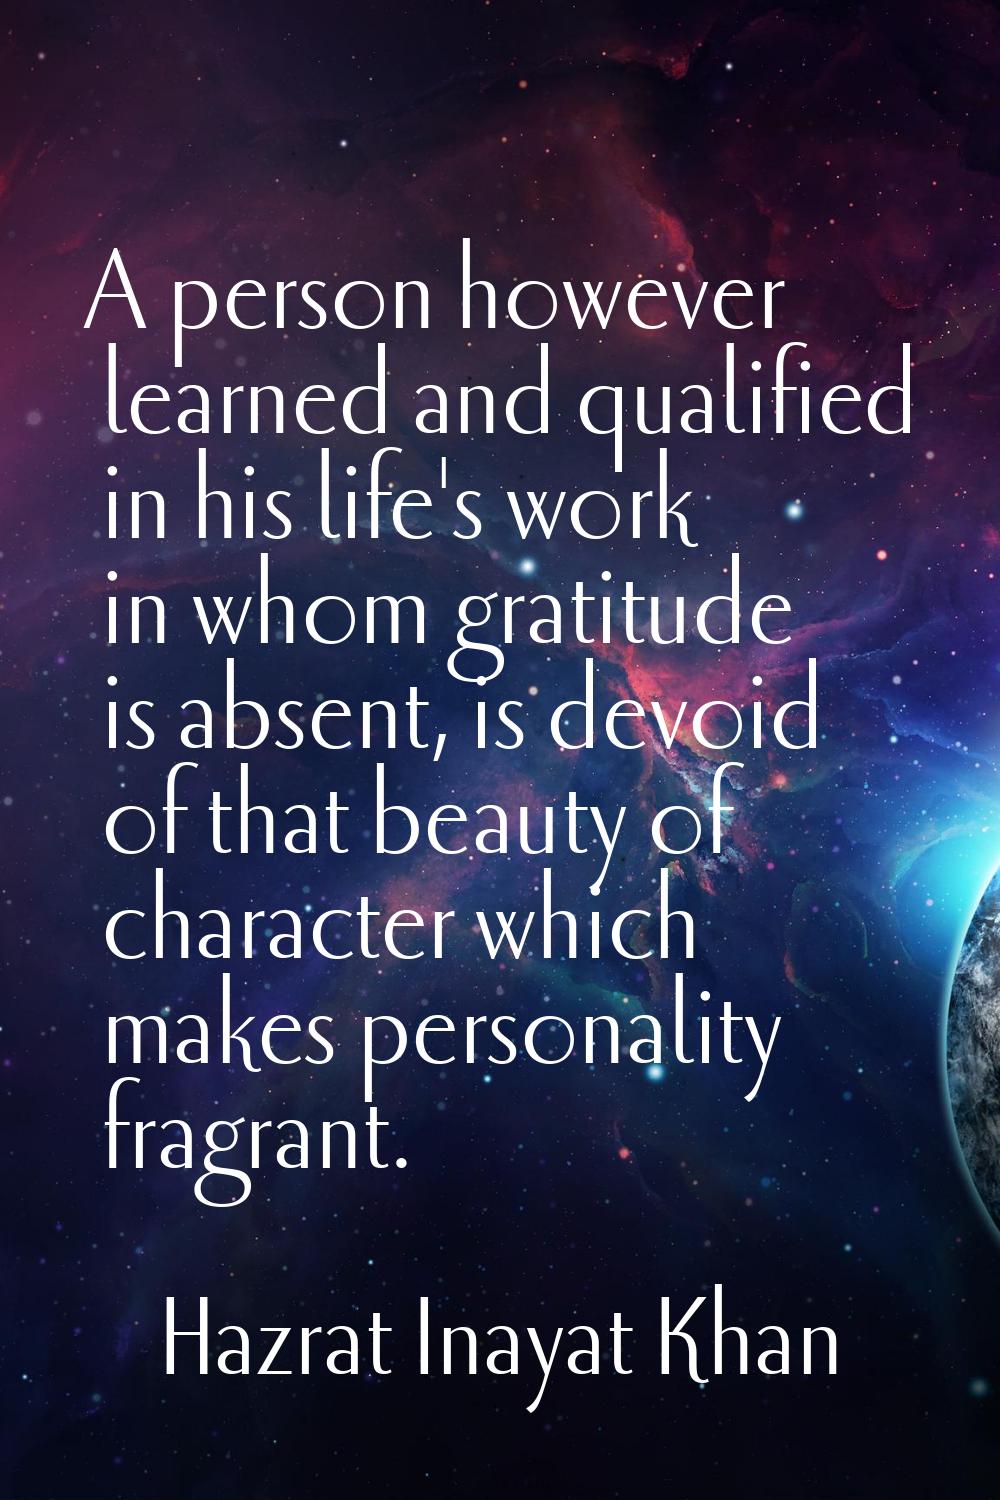 A person however learned and qualified in his life's work in whom gratitude is absent, is devoid of